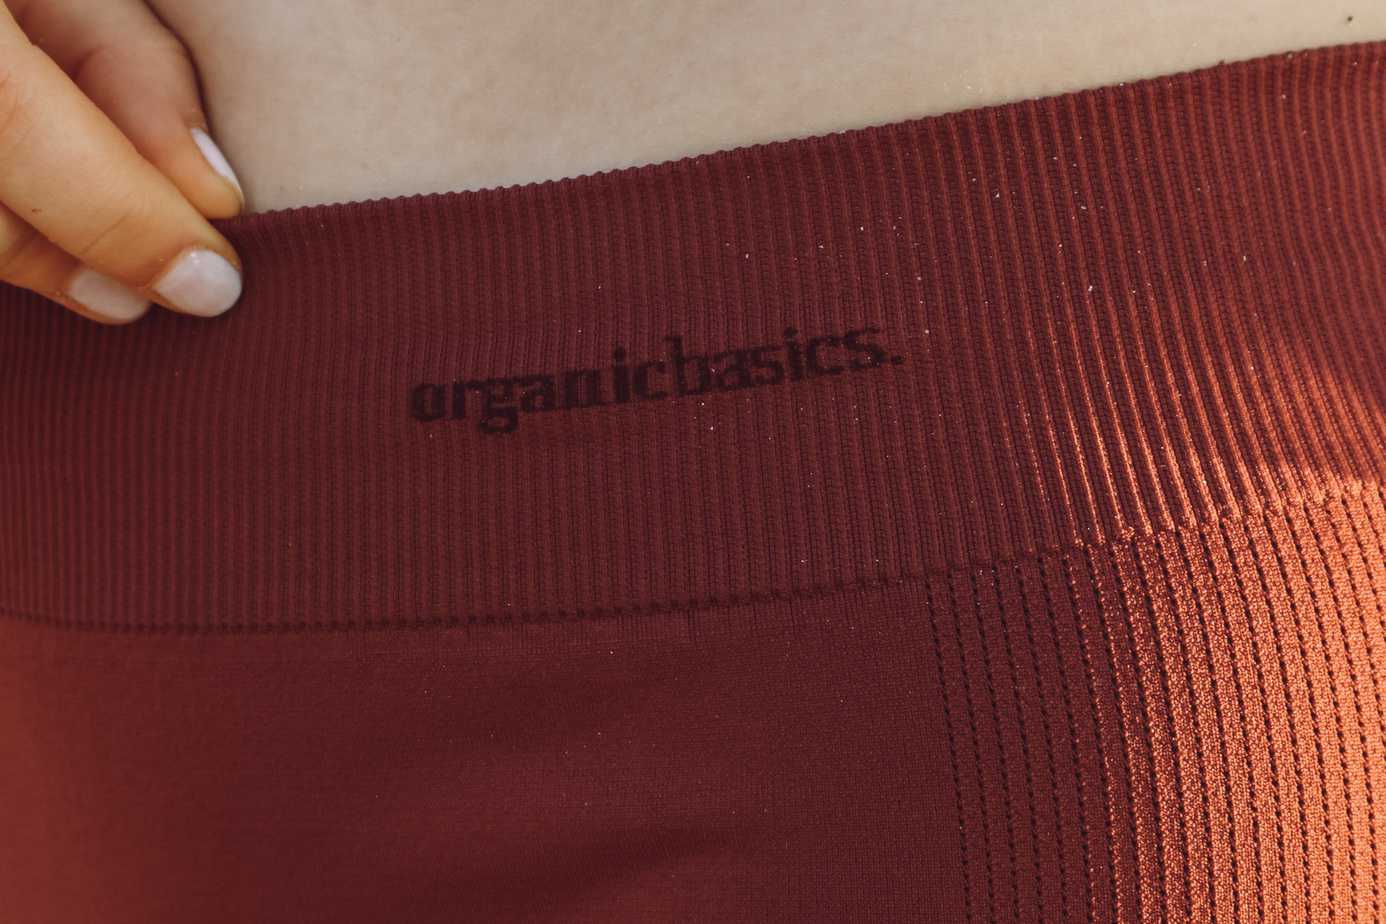 Organic Basics silvertech activewear claims its anti-odor technology extends time between washing. Could these be a traveler's dream? I took them for a spin and here's my review. #organicbasics #organicbasicssilvertech #travelclothes